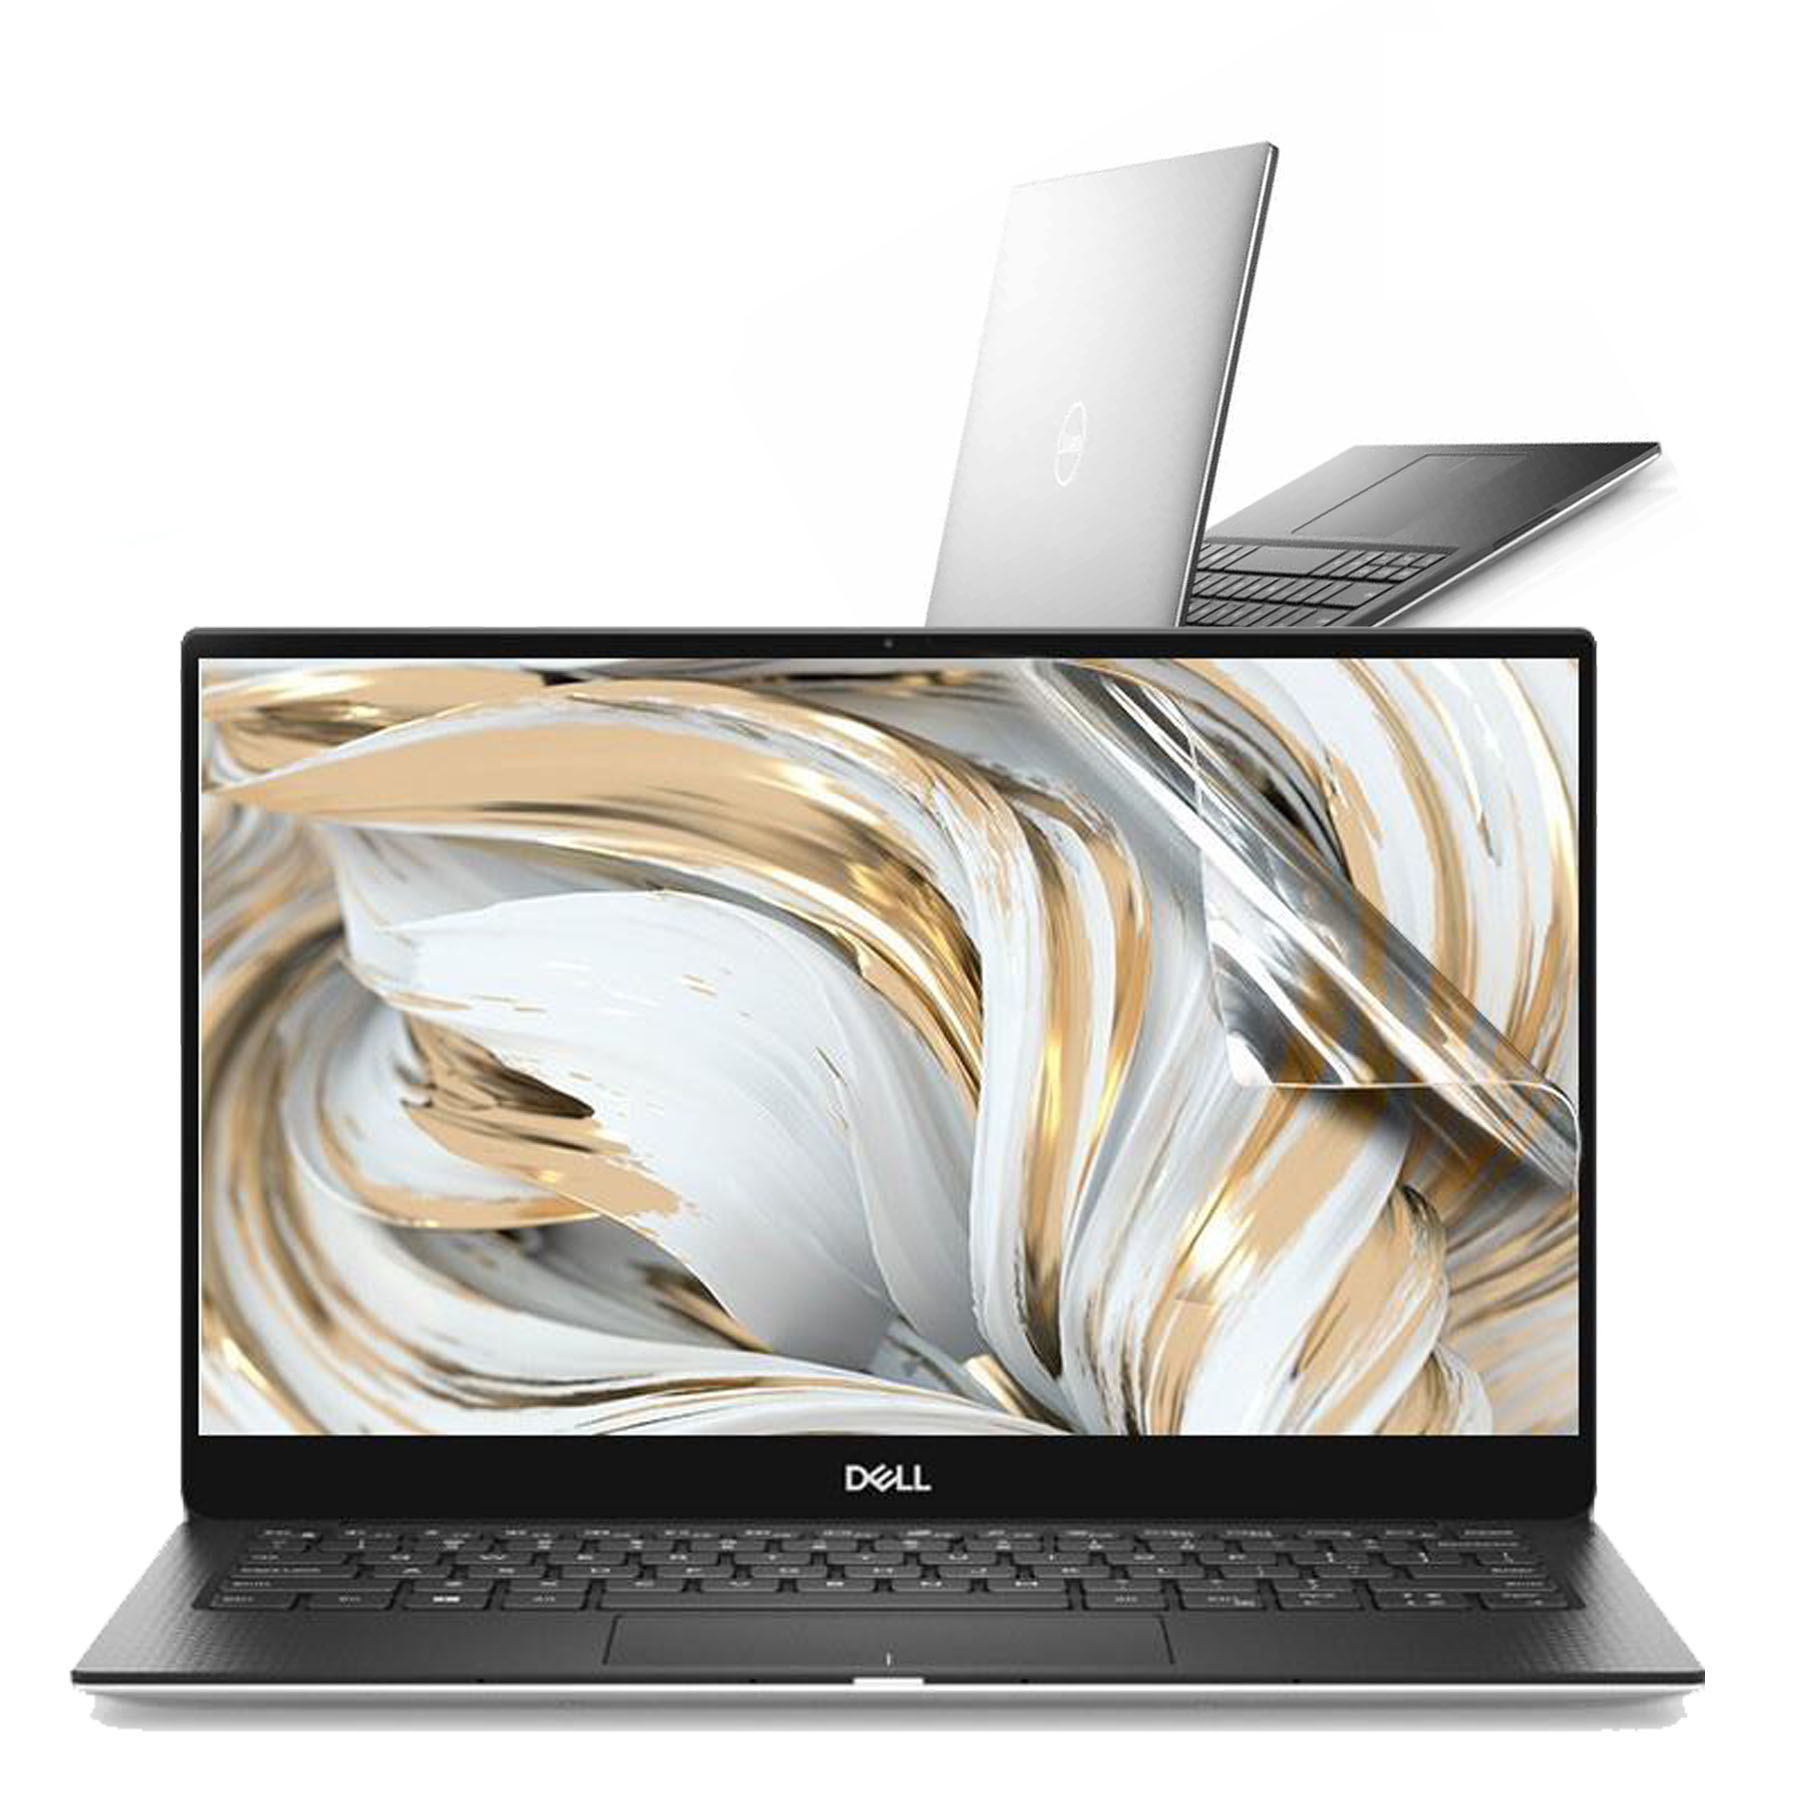 [Like New] Laptop Dell XPS 13 9305 (2021) Core i5-1135G7, 8GB, 256GB, Iris Xe Graphics, 13.3'' FHD